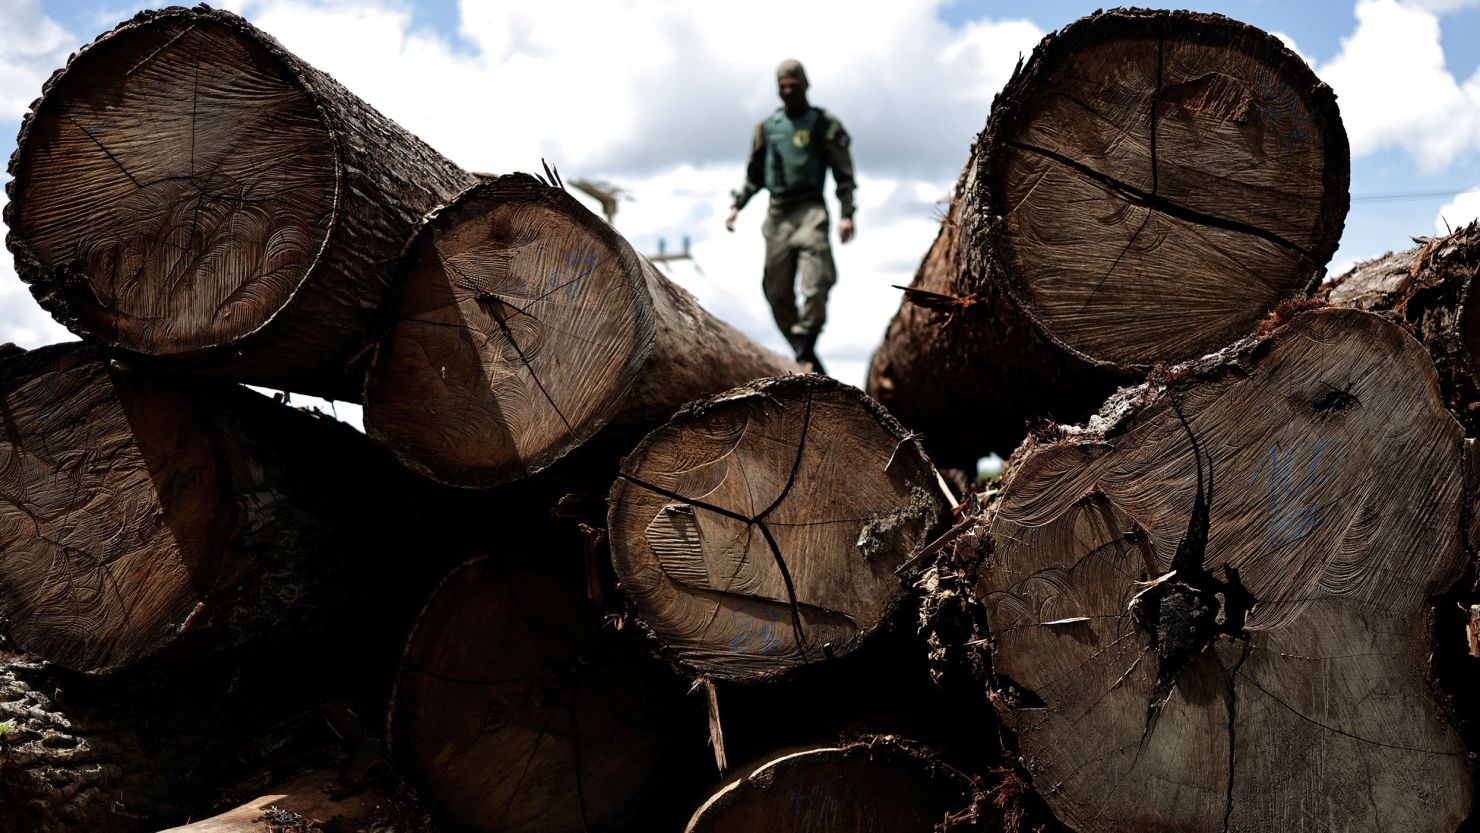 A representative from the Brazilian Institute for the Environment and Renewable Natural Resources (IBAMA) inspects a tree extracted from the Amazon rainforest, during an operation to combat deforestation.